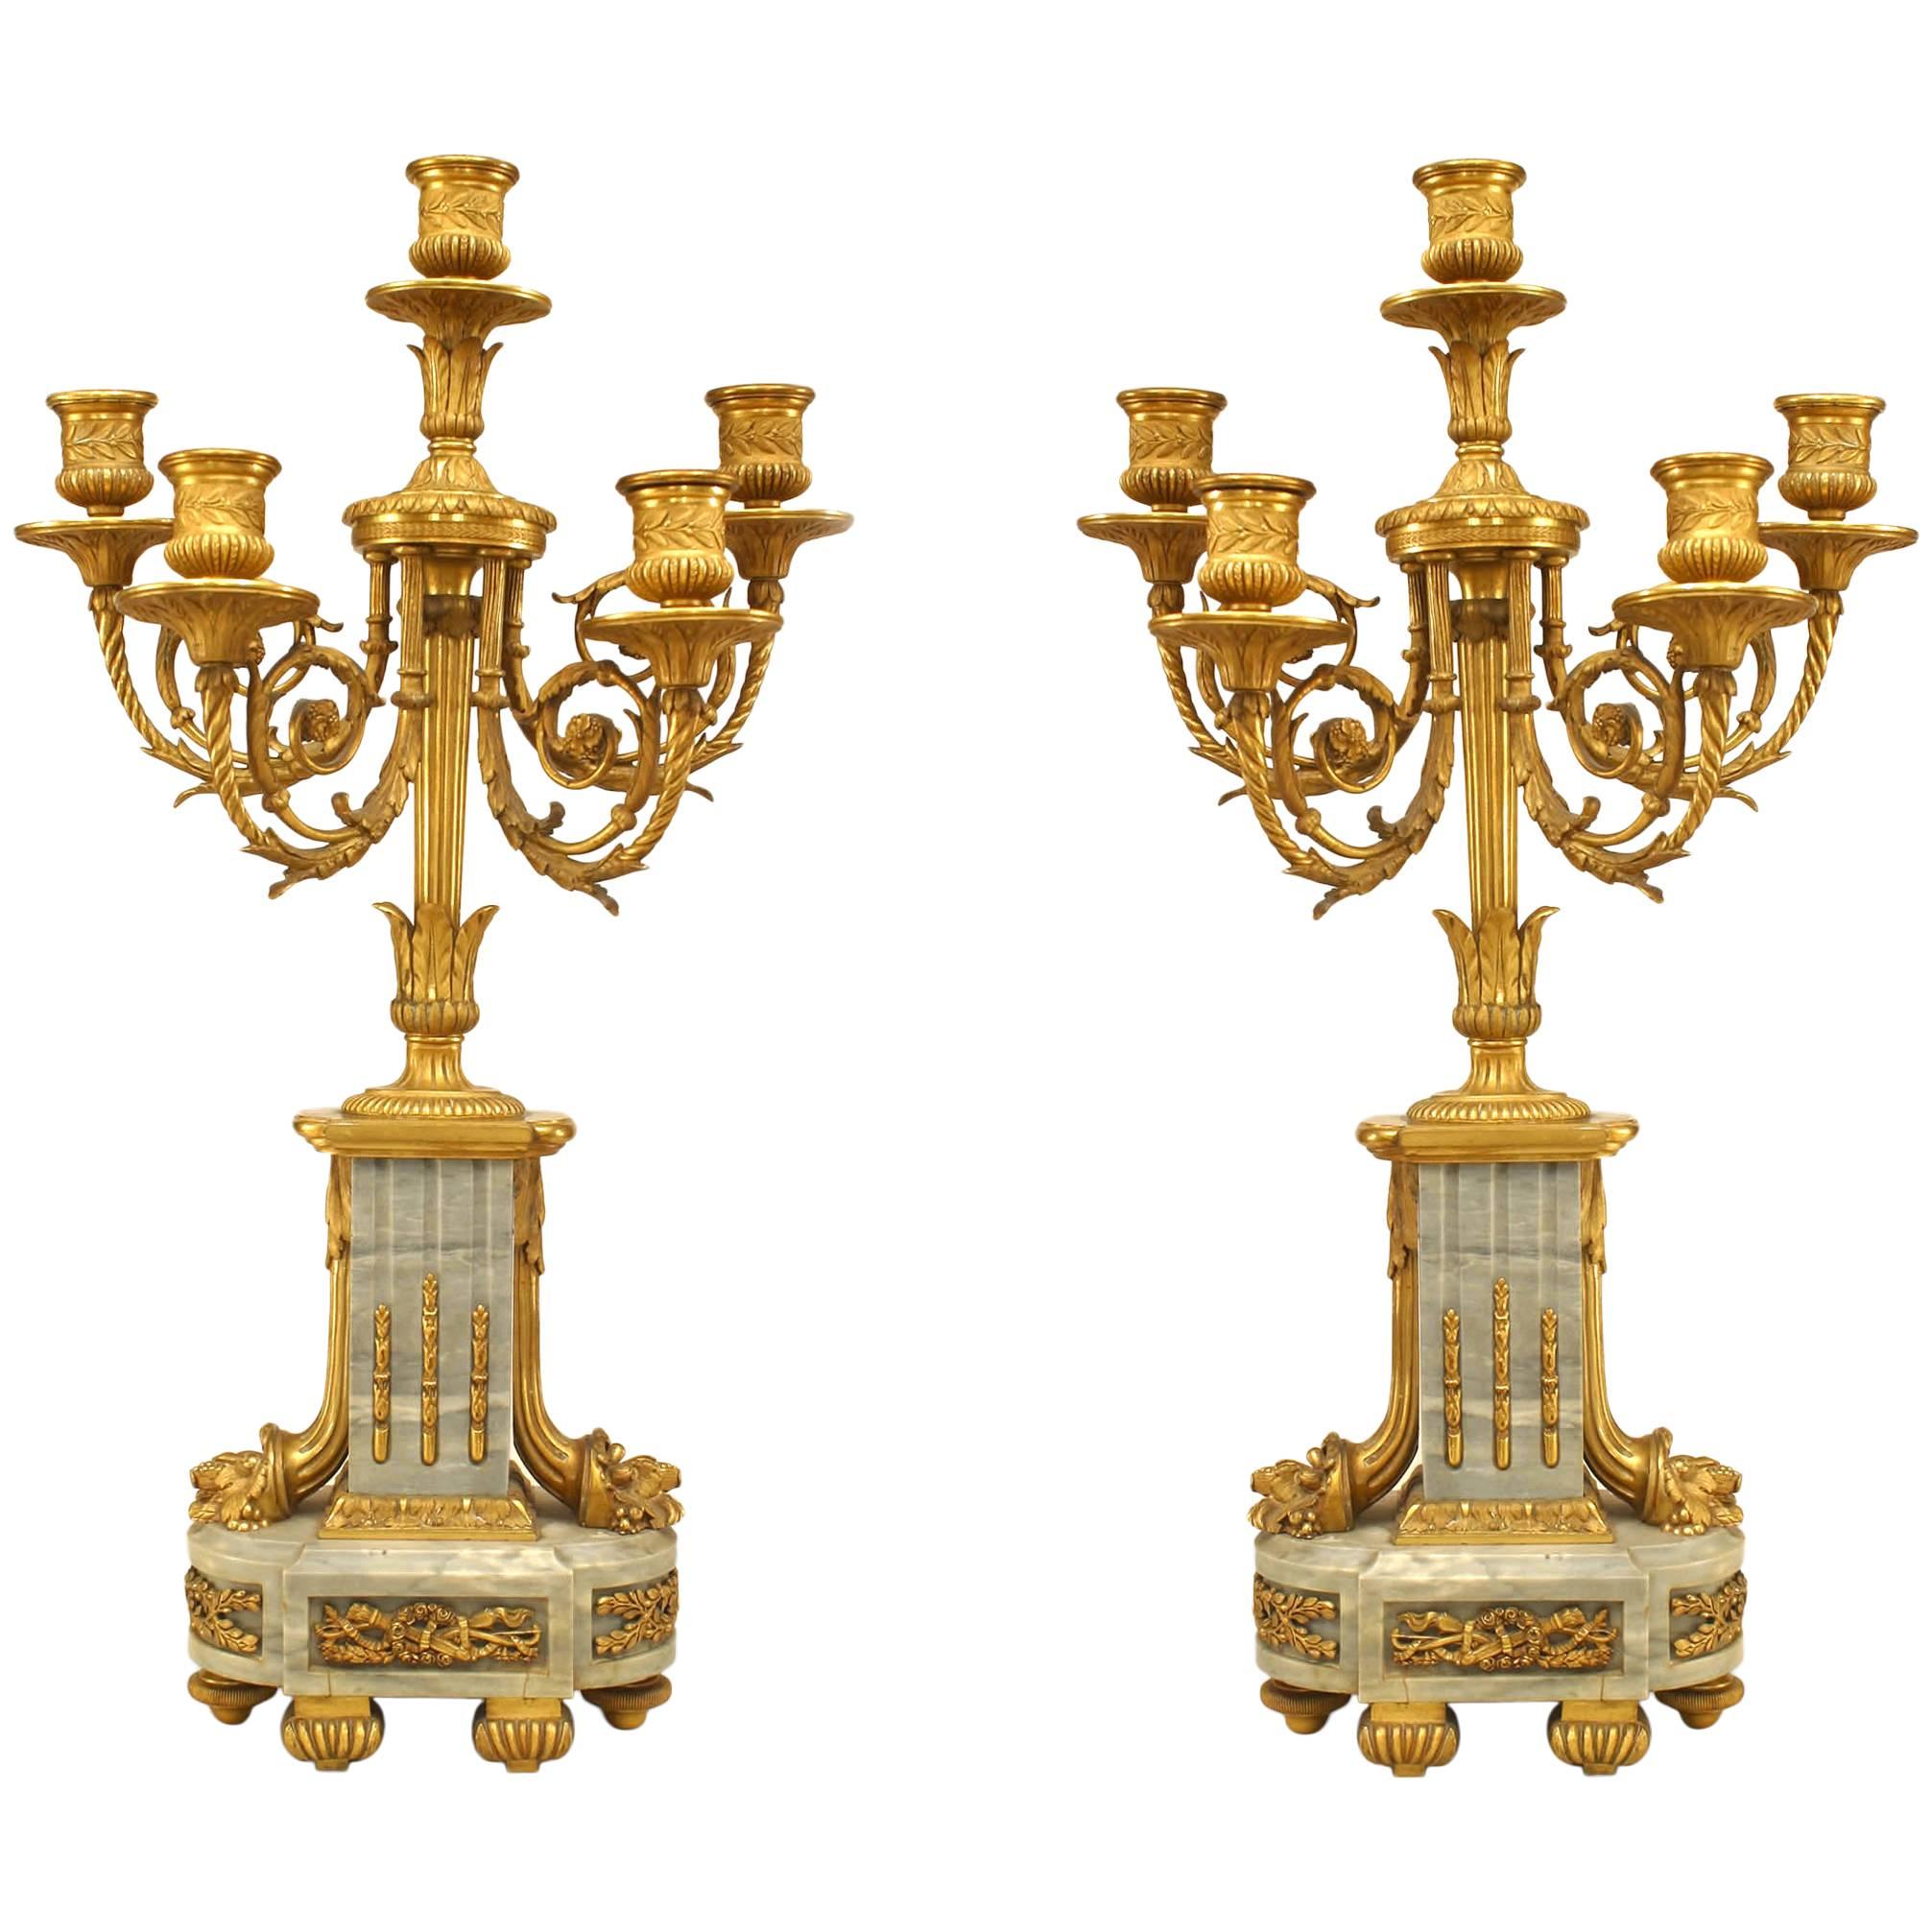 Pair of French Louis XVI Style Gilt Bronze and Marble Candelabras